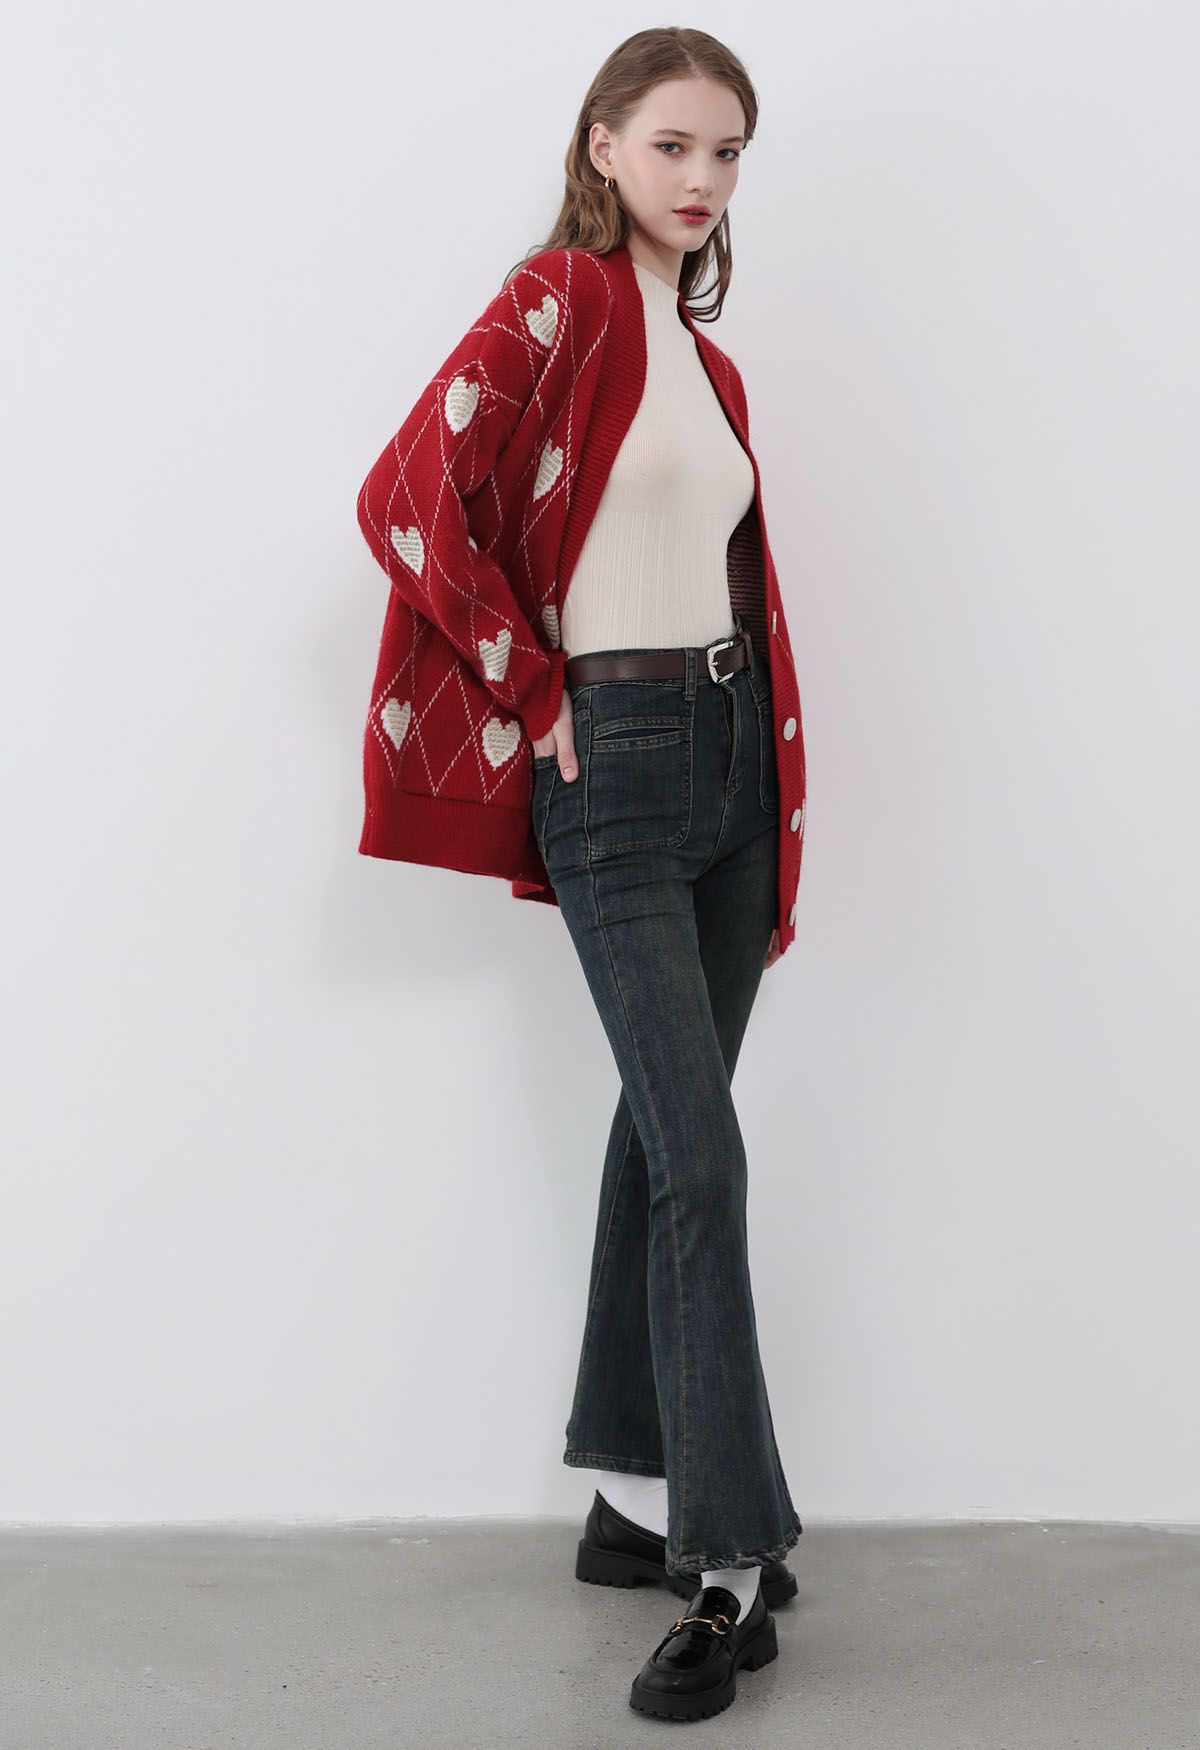 Diamond-Shape Heart Pattern Button-Up Cardigan in Red